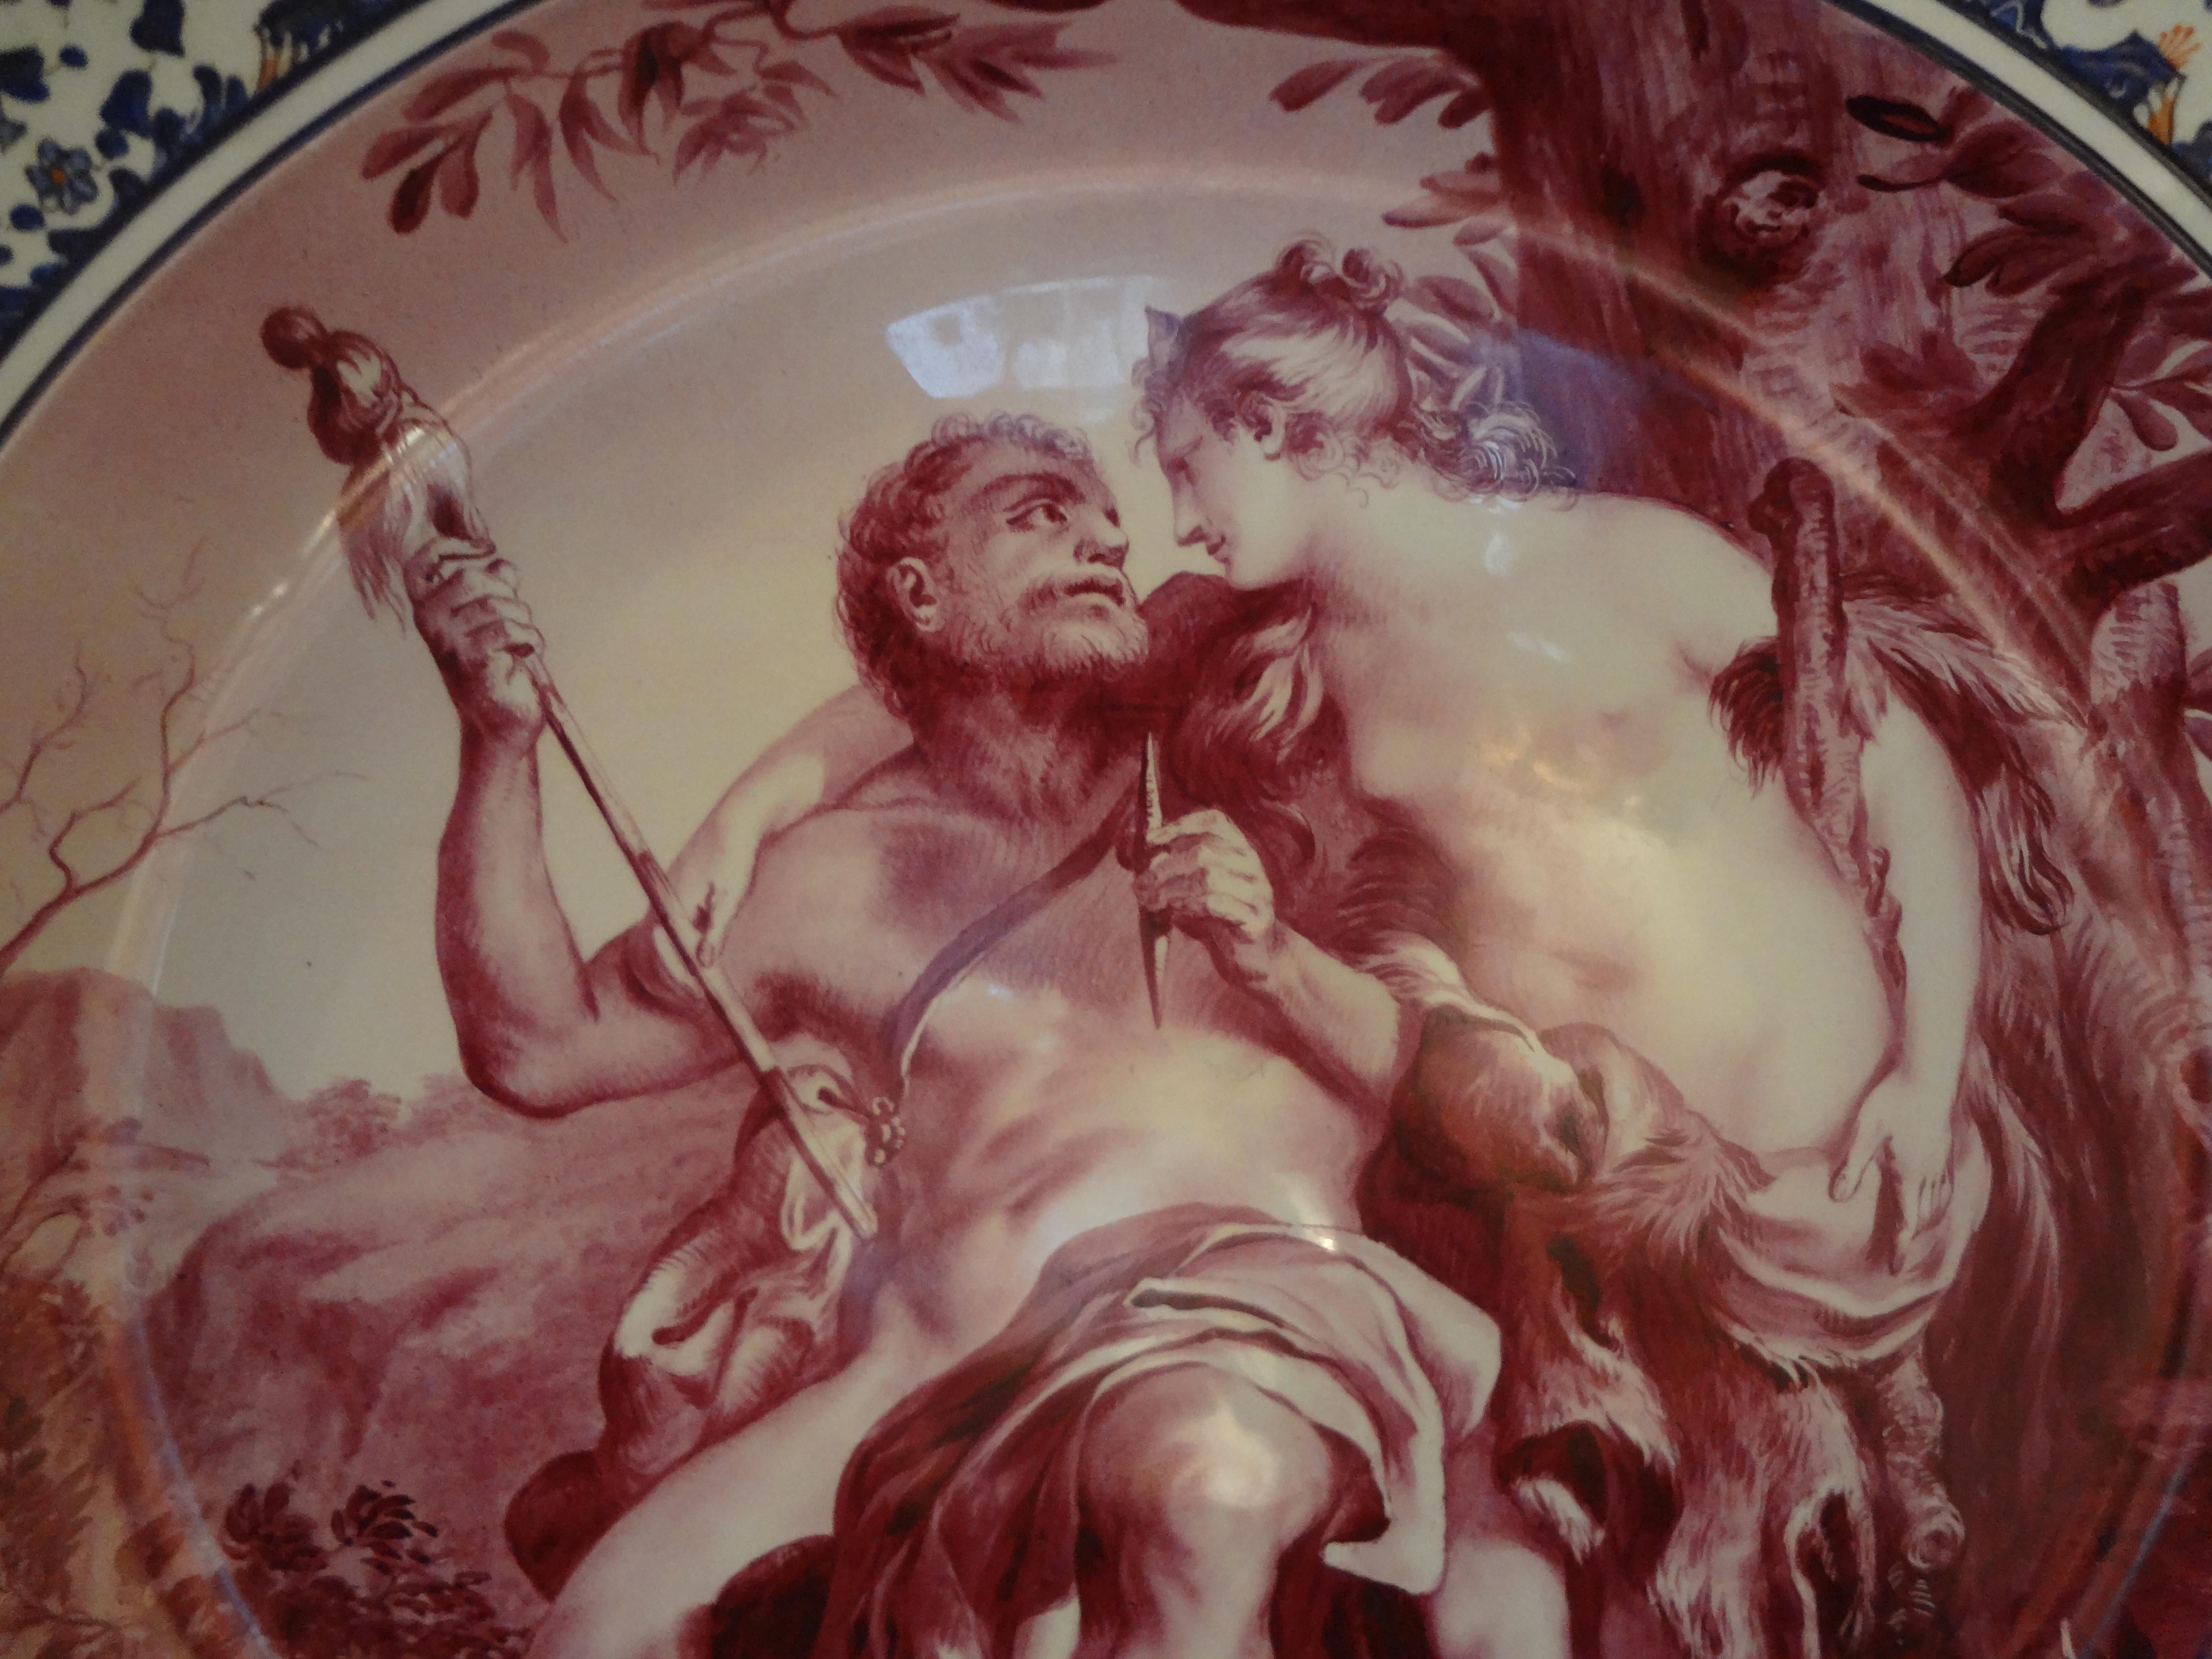 19th century French porcelain Allegorical charger.
Stunning 19th century French hand decorated, artist-signed allegorical porcelain charger.
This beautiful well executed faience charger depicting Hercules is executed in unusual burgundy and dark